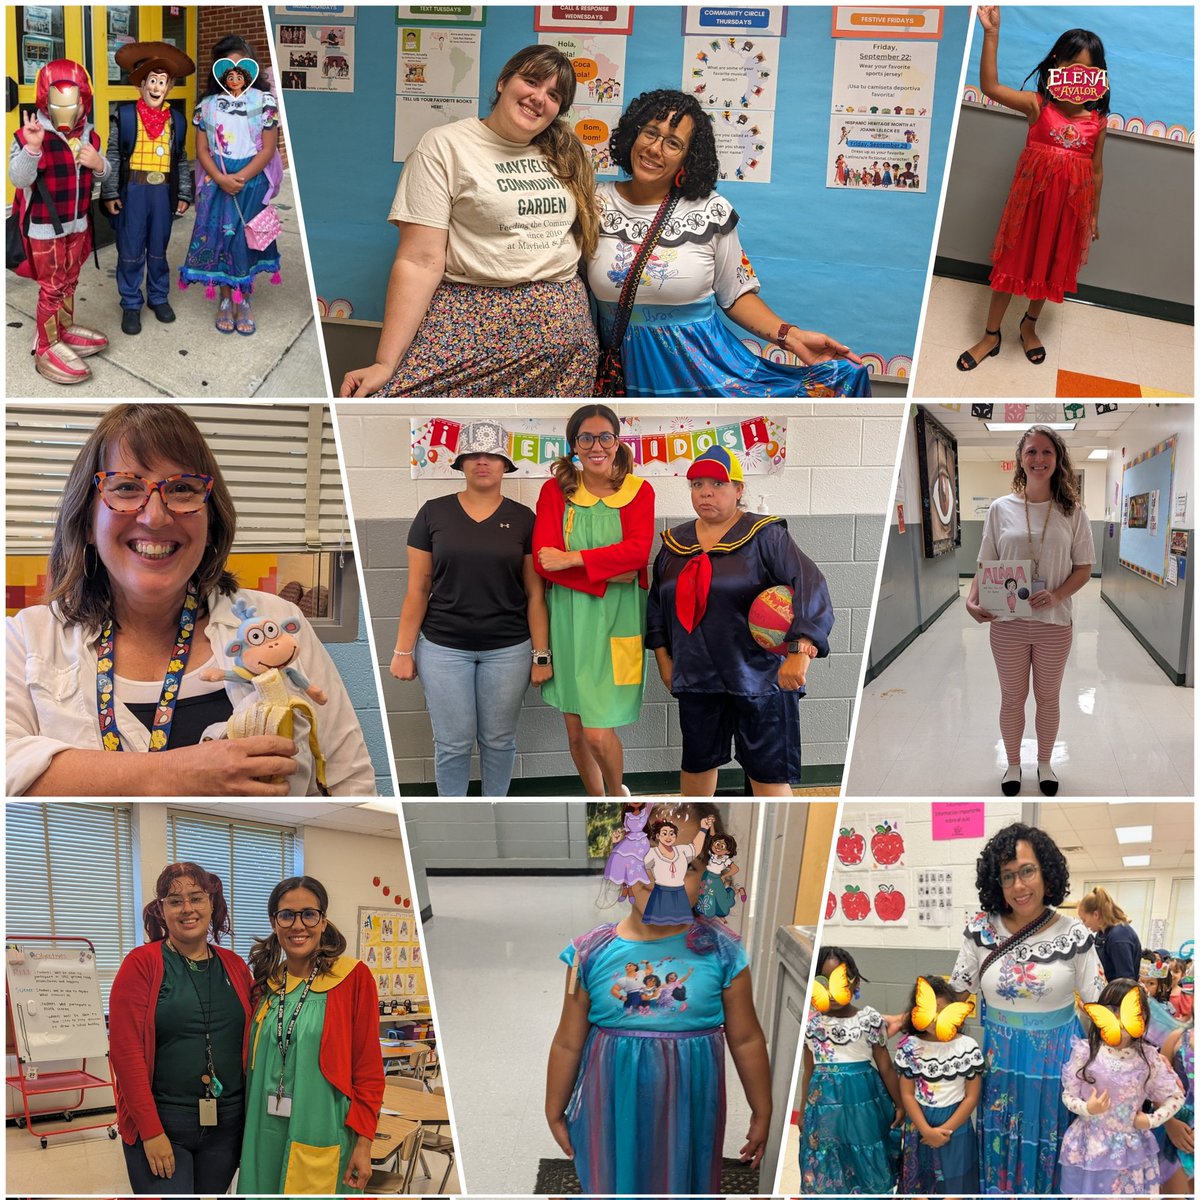 #HispanicHeritageMonth has been highlighted each day @JoAnnLeleckES , but today's #FestiveFriday was ONE of my favs! (Dress up as a fictional #Latina #Latino #Latine character! 

#SalvadoranMirabel 
#LeleckRocks!